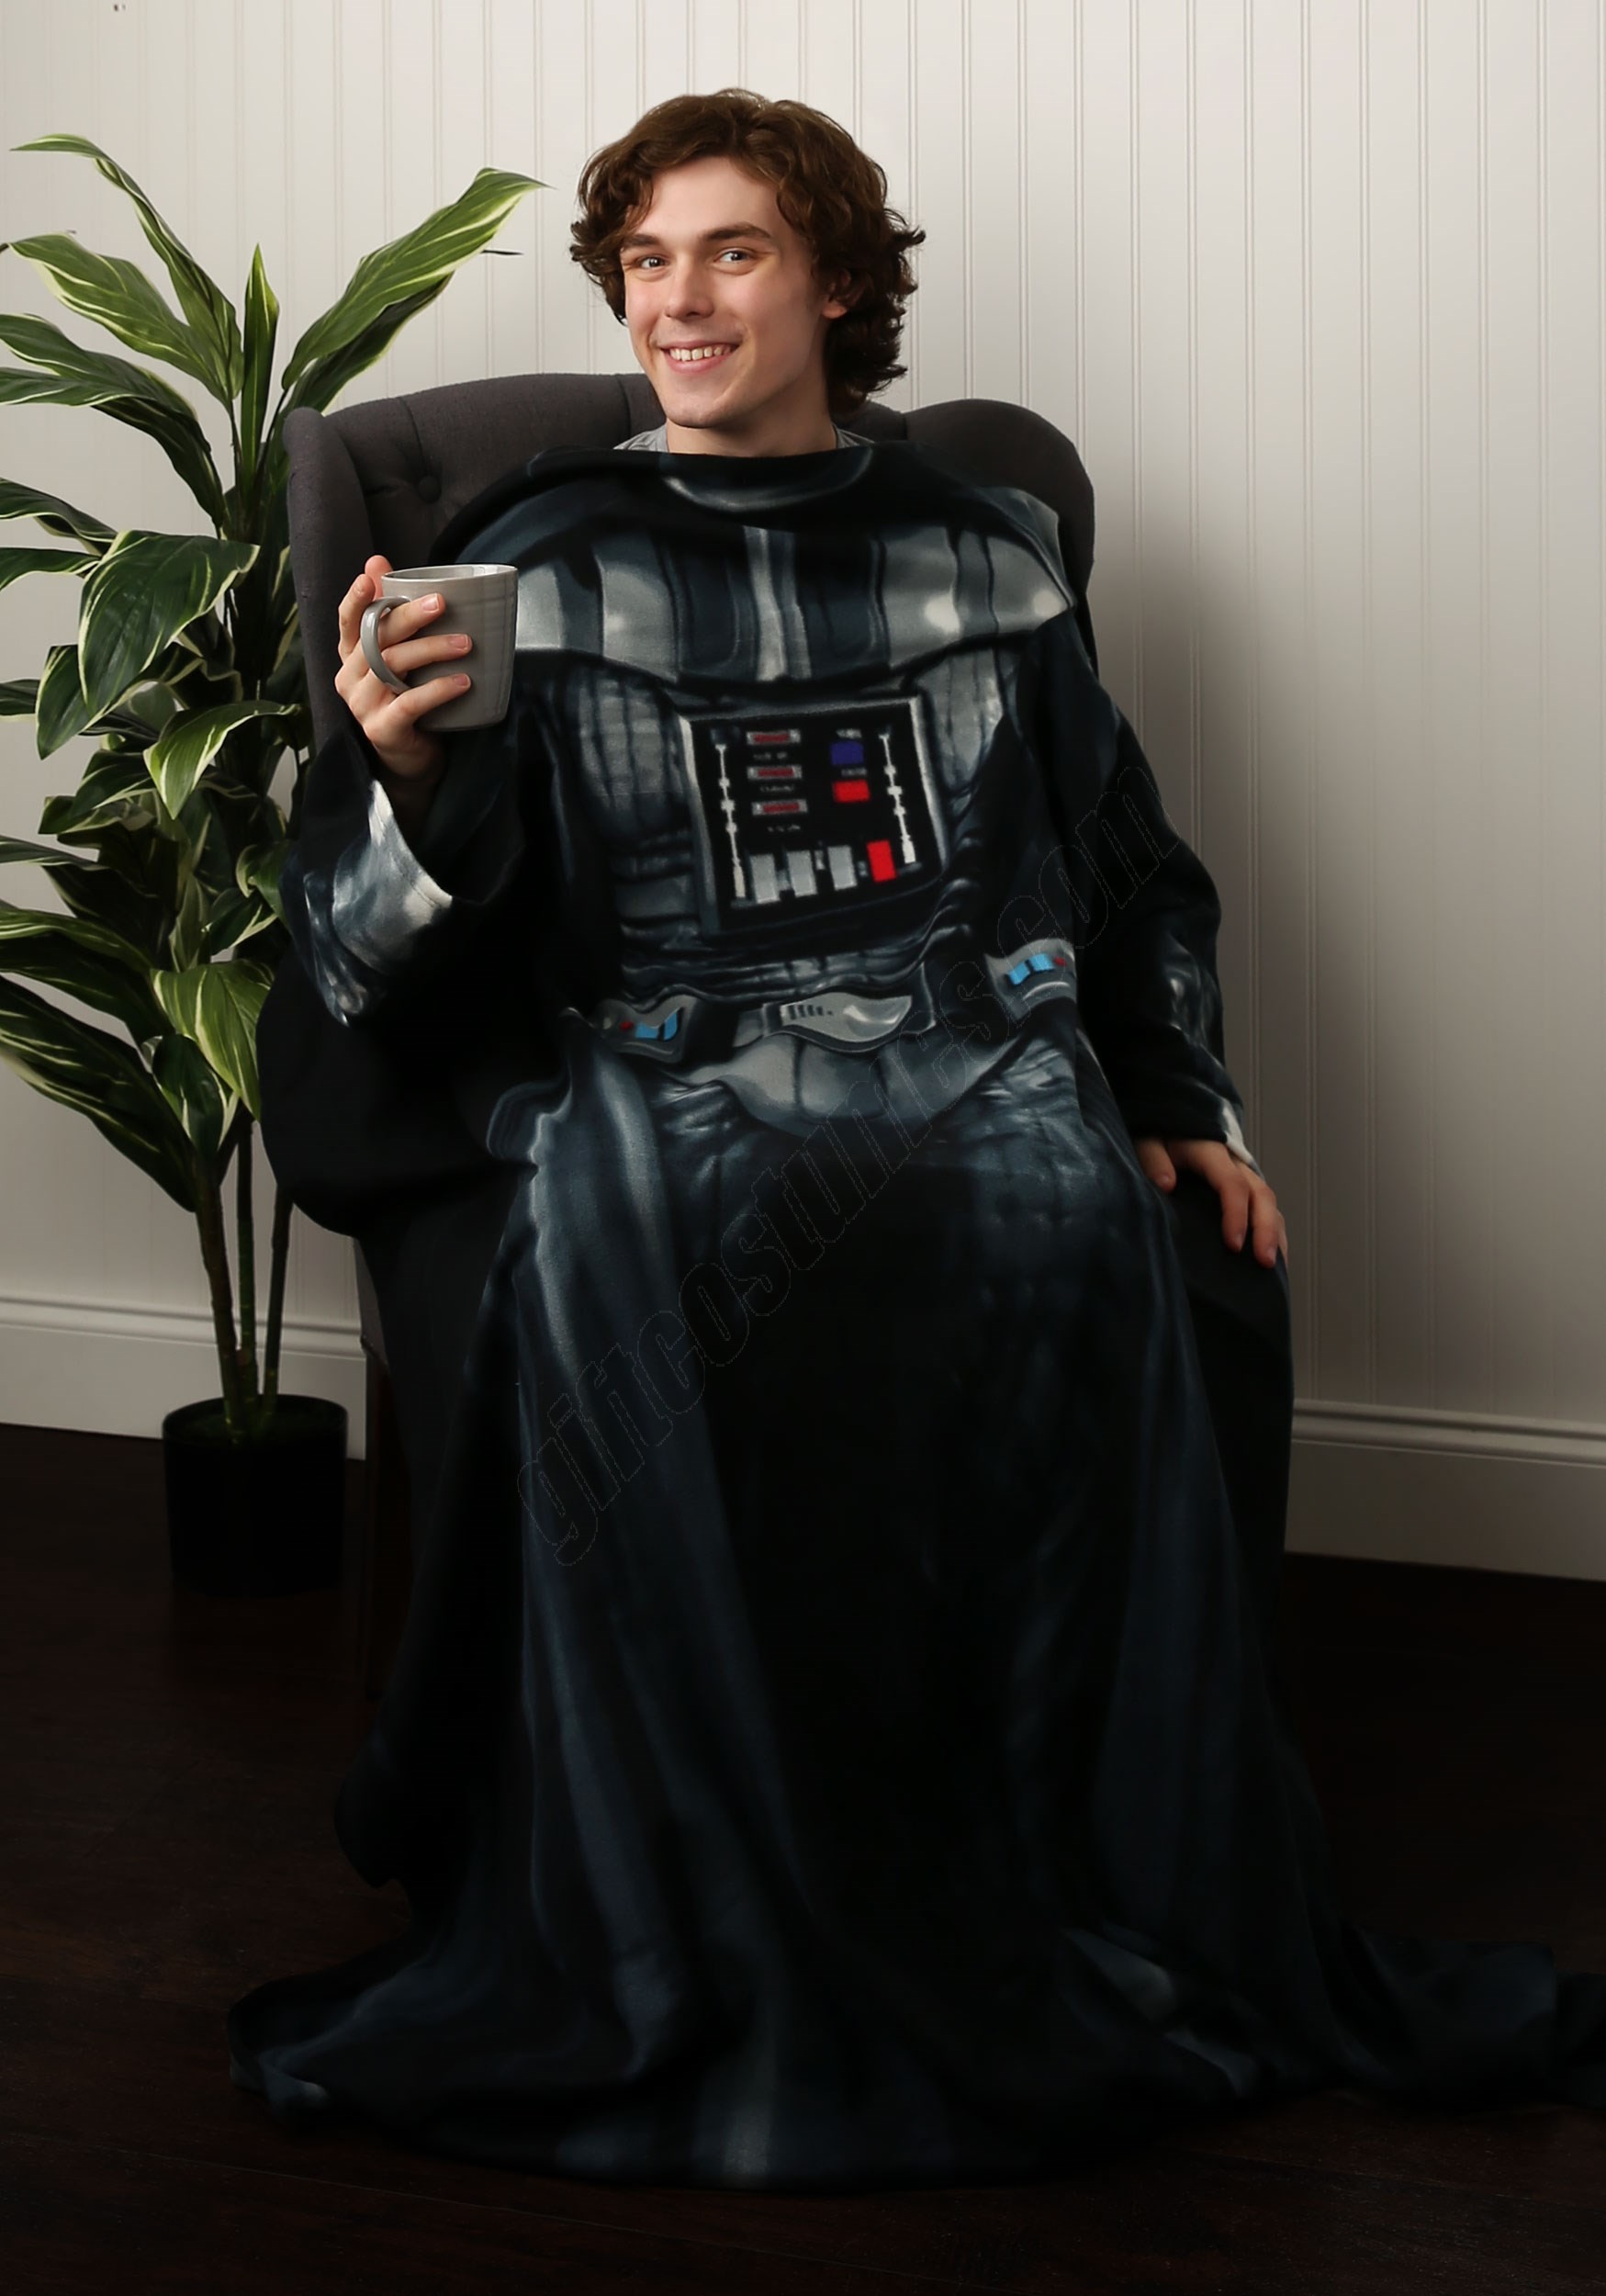 Adult Darth Vader Comfy Throw - Women's - Adult Darth Vader Comfy Throw - Women's